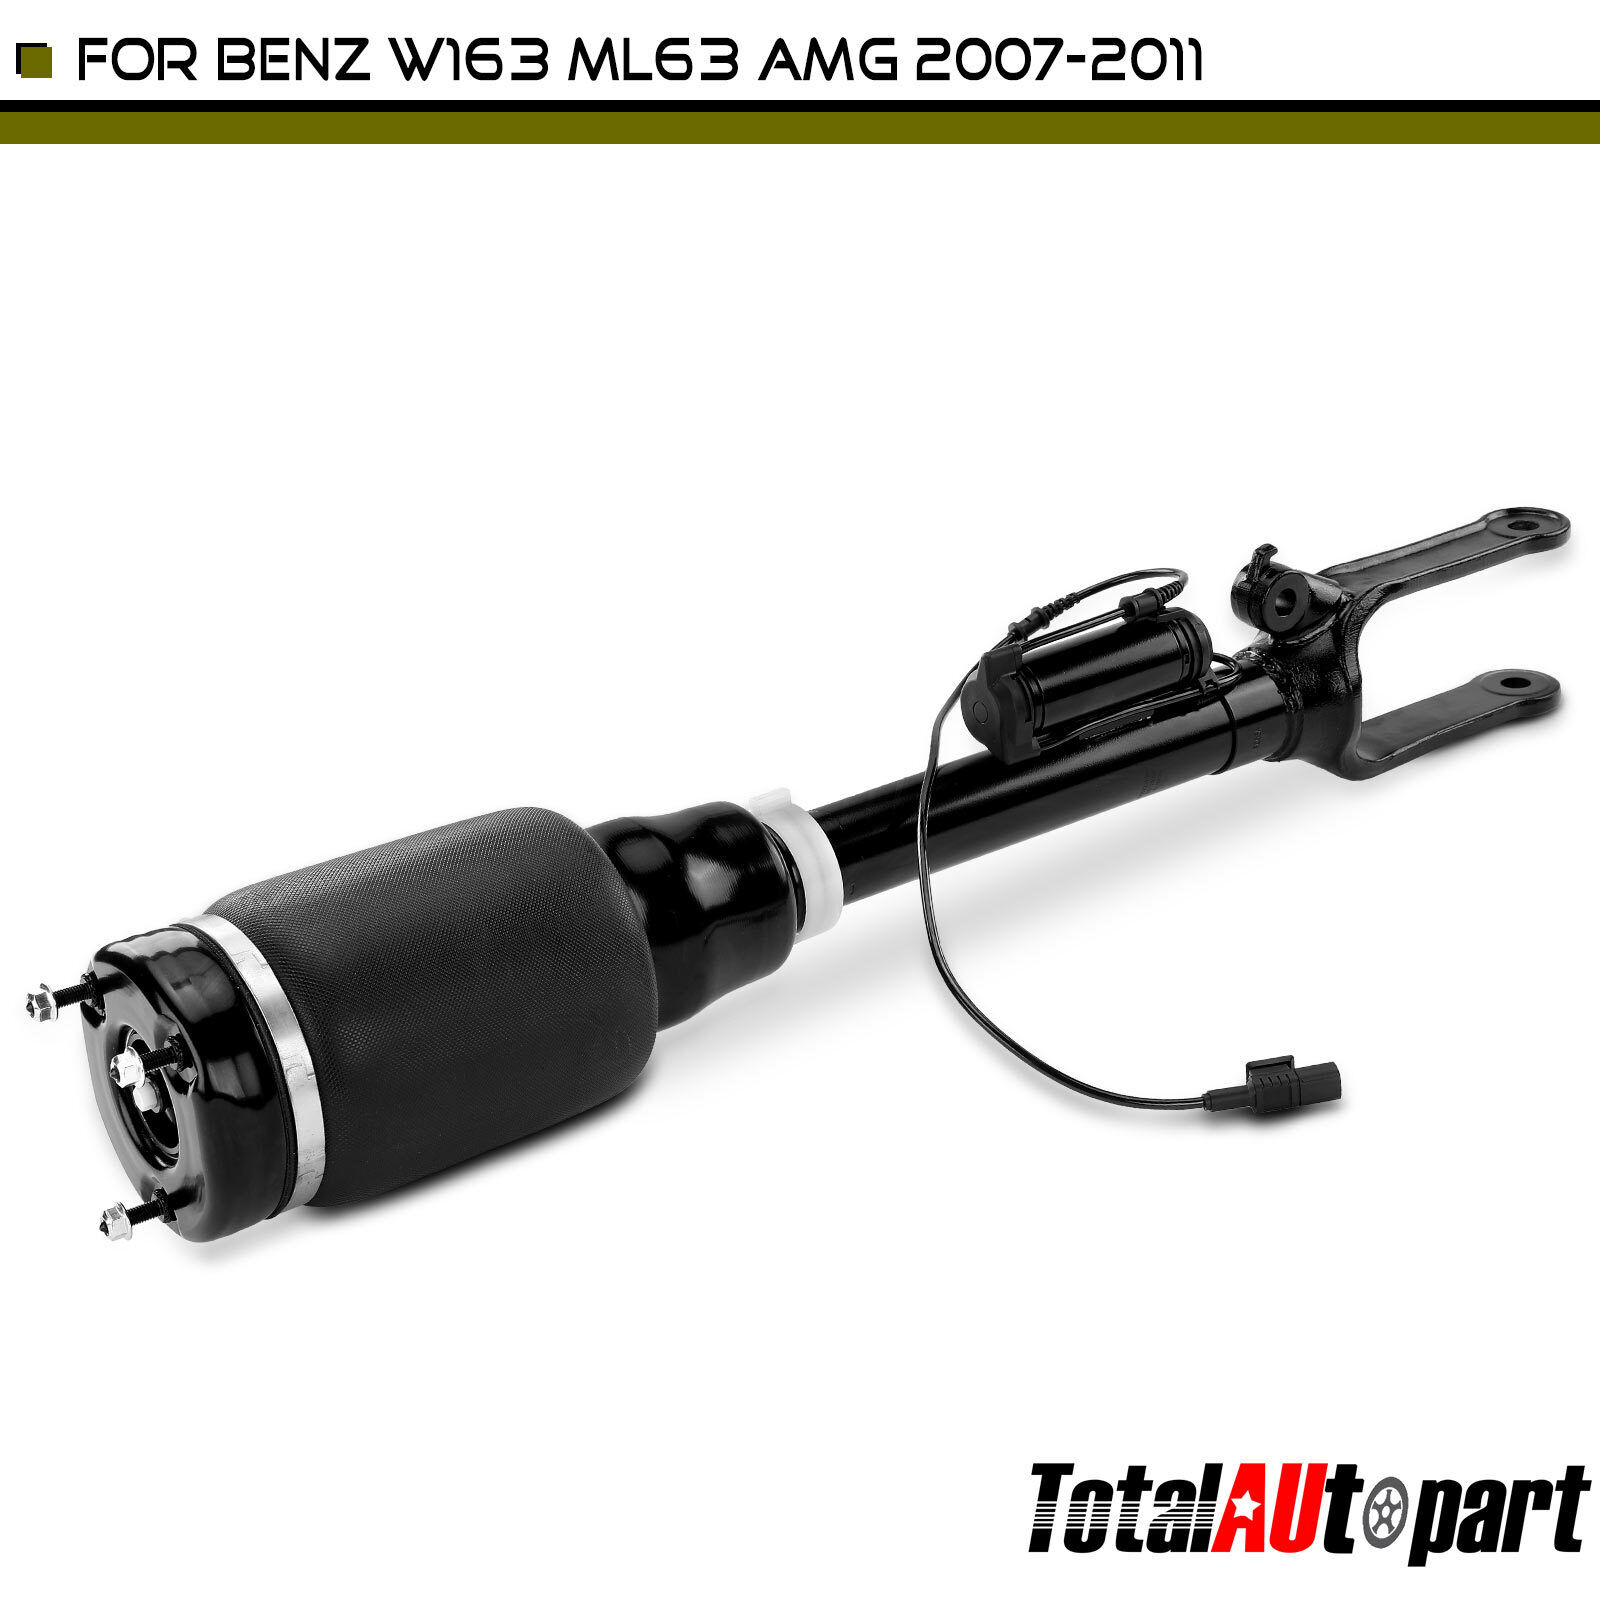 Front Left /Right Suspension Air Strut for Benz ML63 AMG W163 2007 2008 09-11